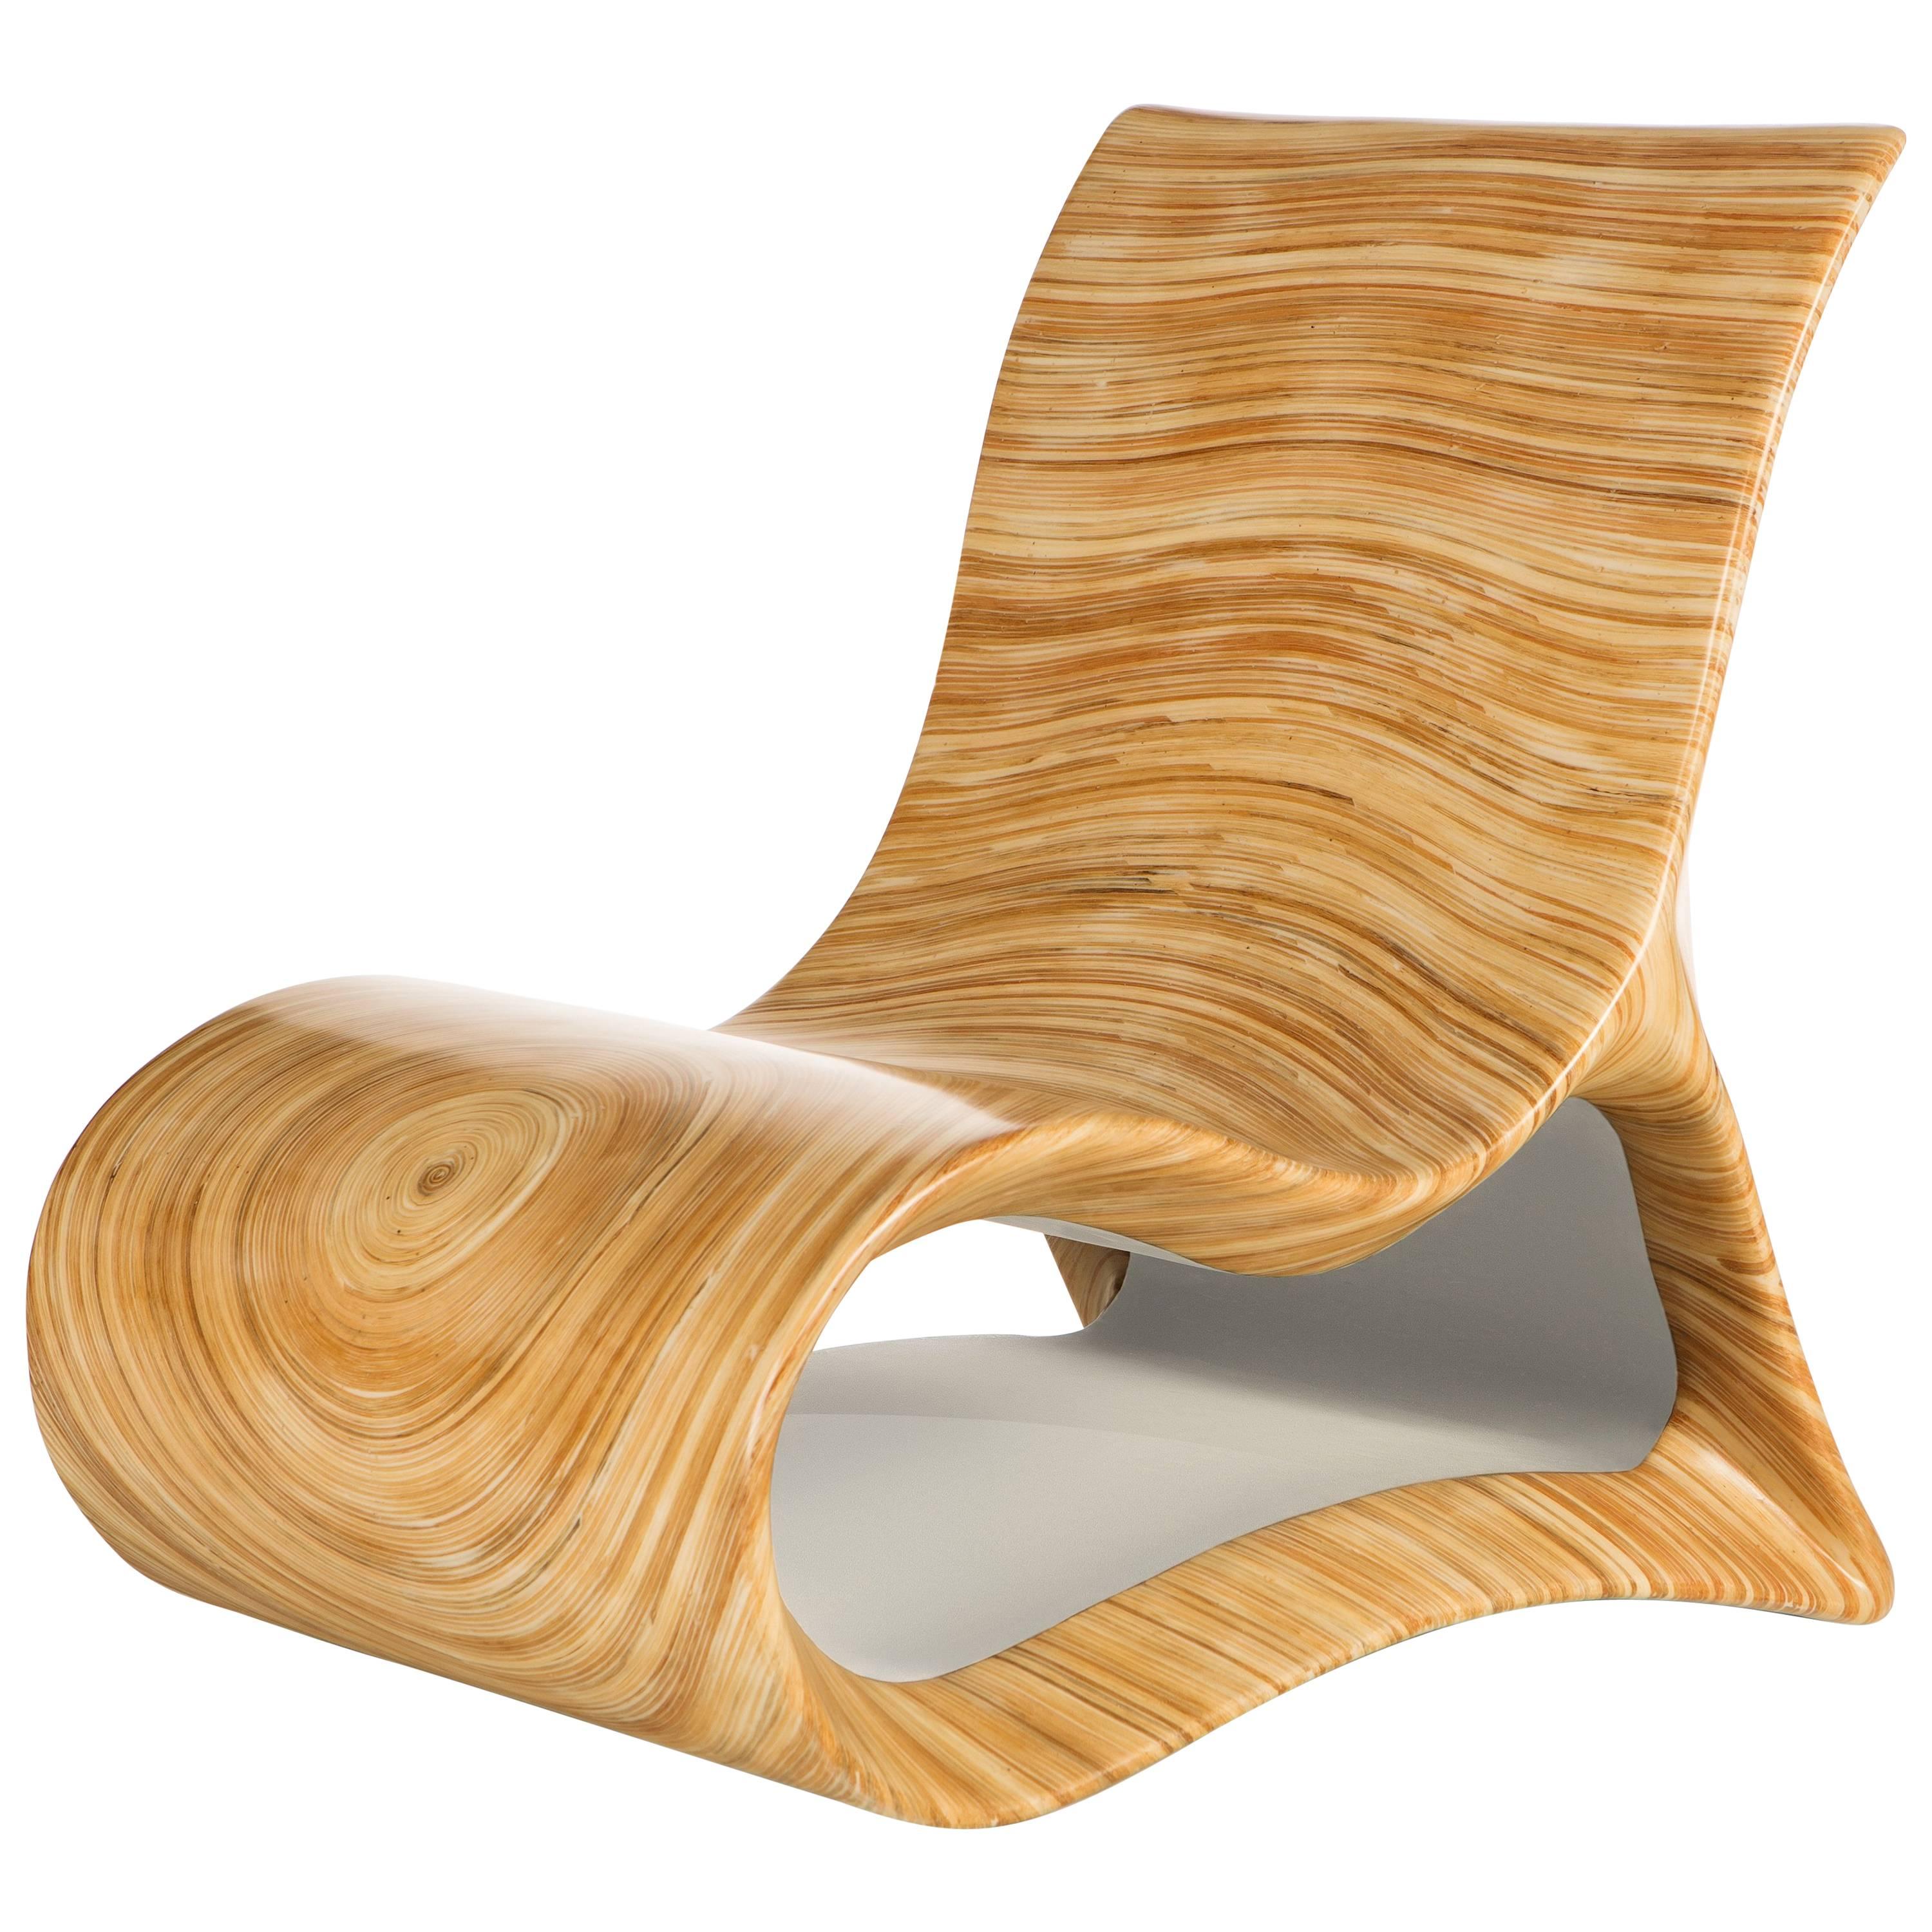 Modern Wooden Altoum Chair in Bright Finish Inspired by Op Art 2014